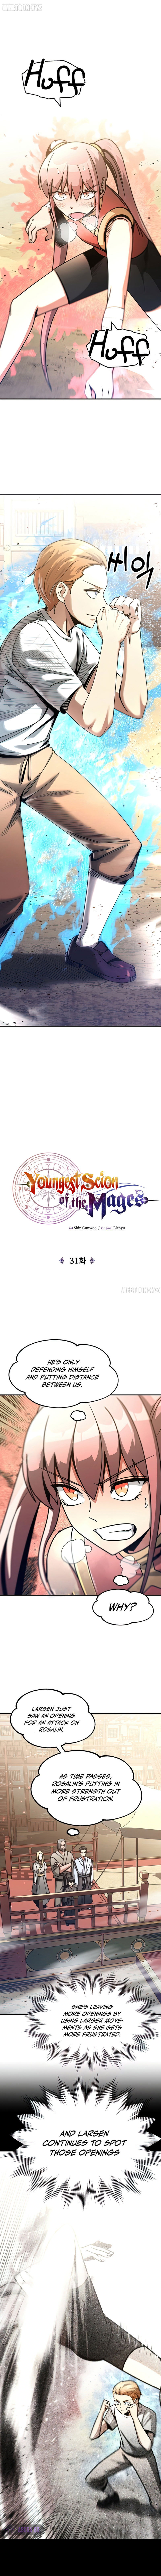 youngest-scion-of-the-mages-chap-31-1